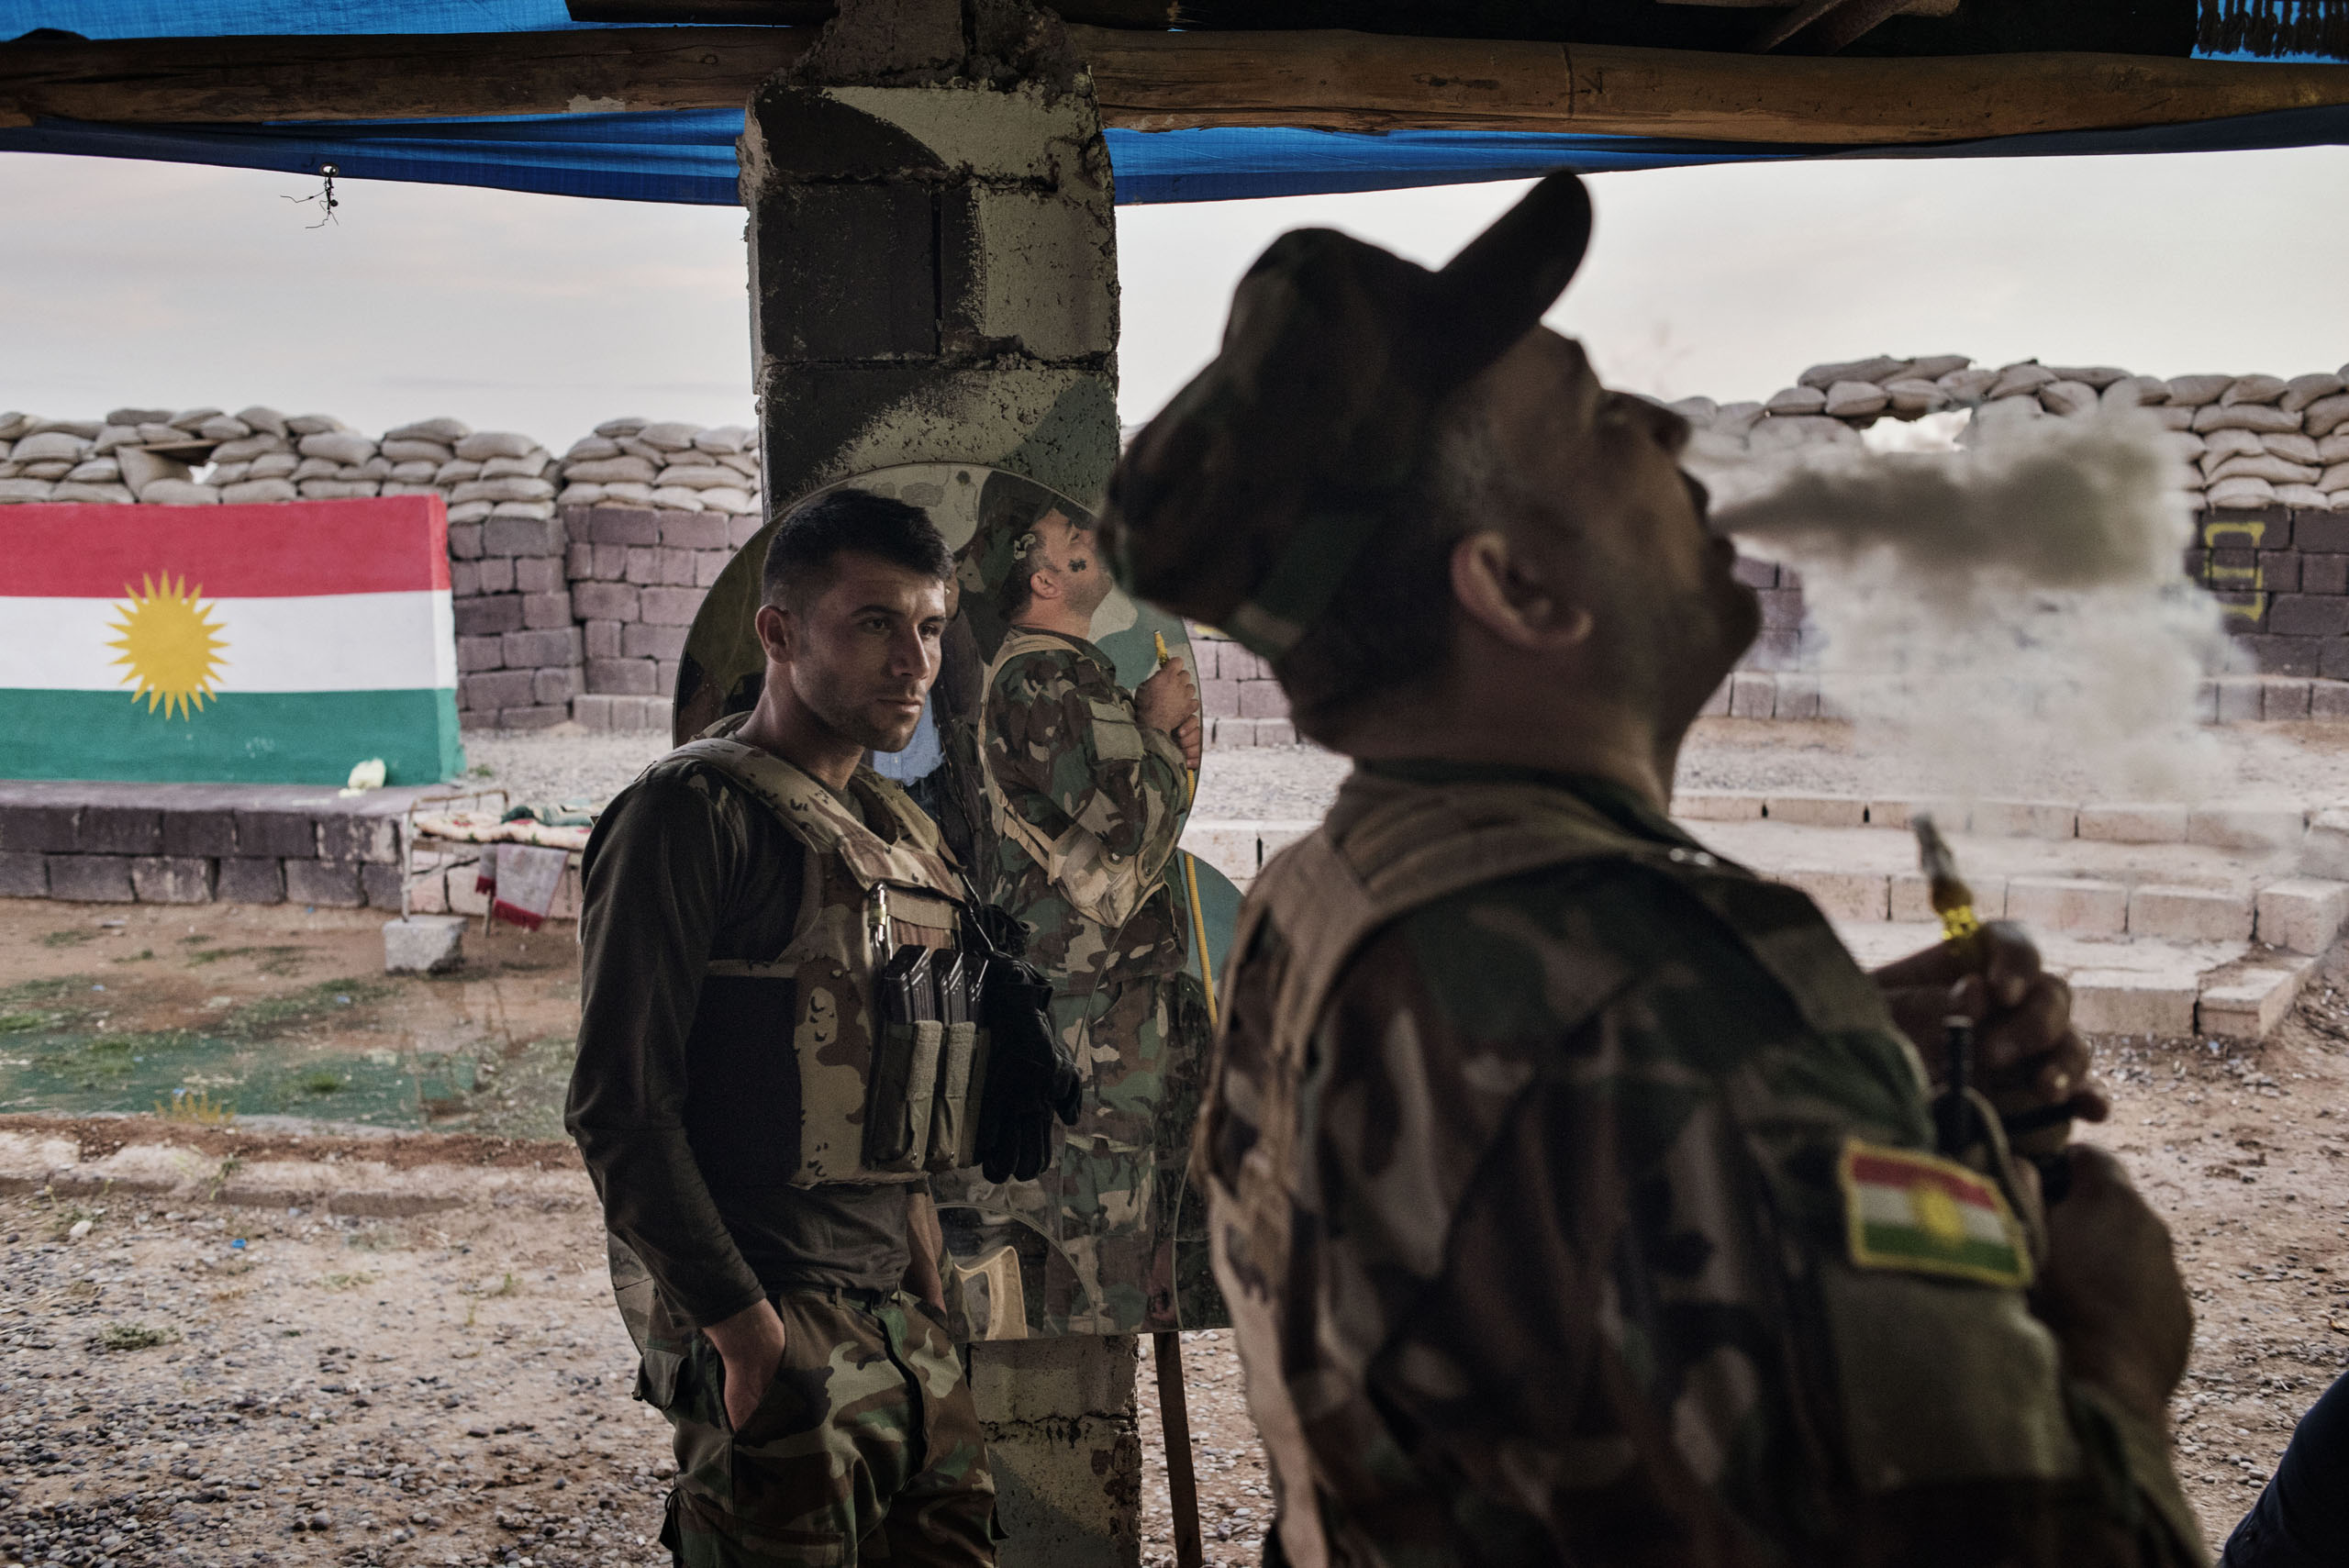 An Iraqi Kurdish fighter exhales tobacco smoke at the front line facing ISIS militants outside the town of Makhmour, northern Iraq, May 8, 2016. Makhmour is one of the key fronts in the battle between Iraqi forces and the jihadists of ISIS. But as a result of disagreements and distrust among rival factions, the overall campaign against ISIS is proceeding slowly. A long-anticipated operation to retake the nearby city of Mosul has been delayed for months.